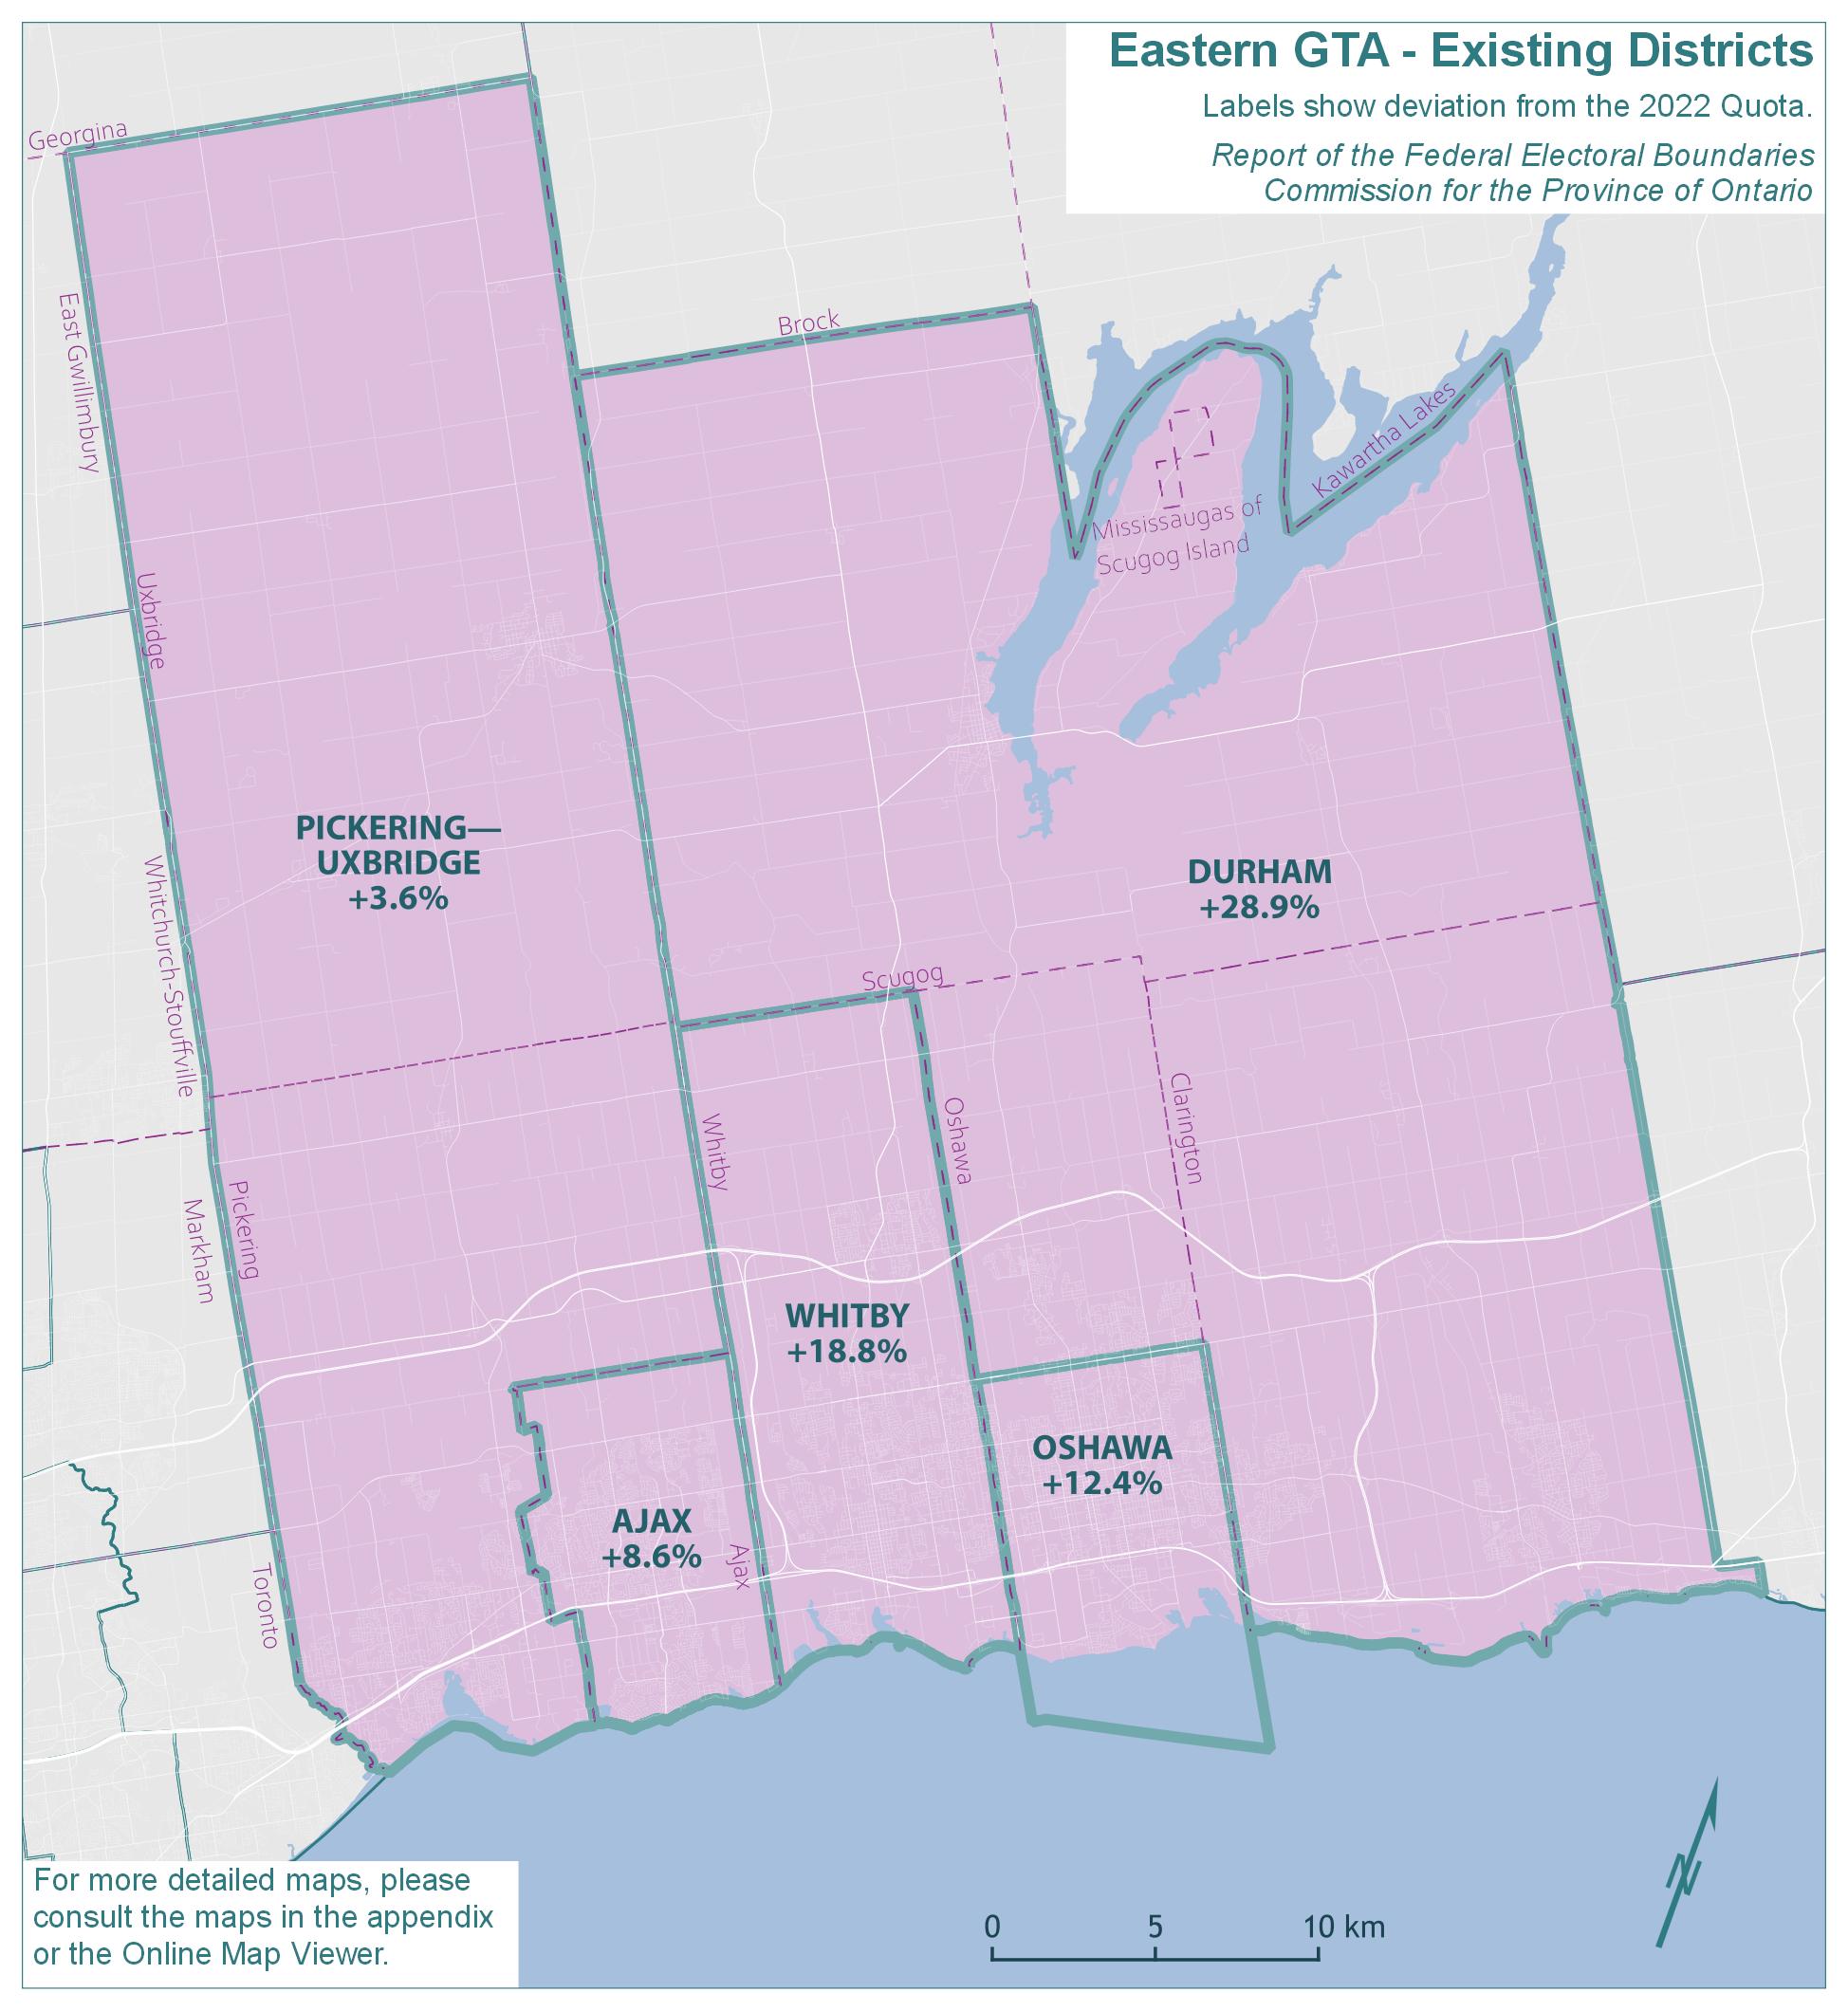 Eastern Greater Toronto Area (GTA) - Existing Districts